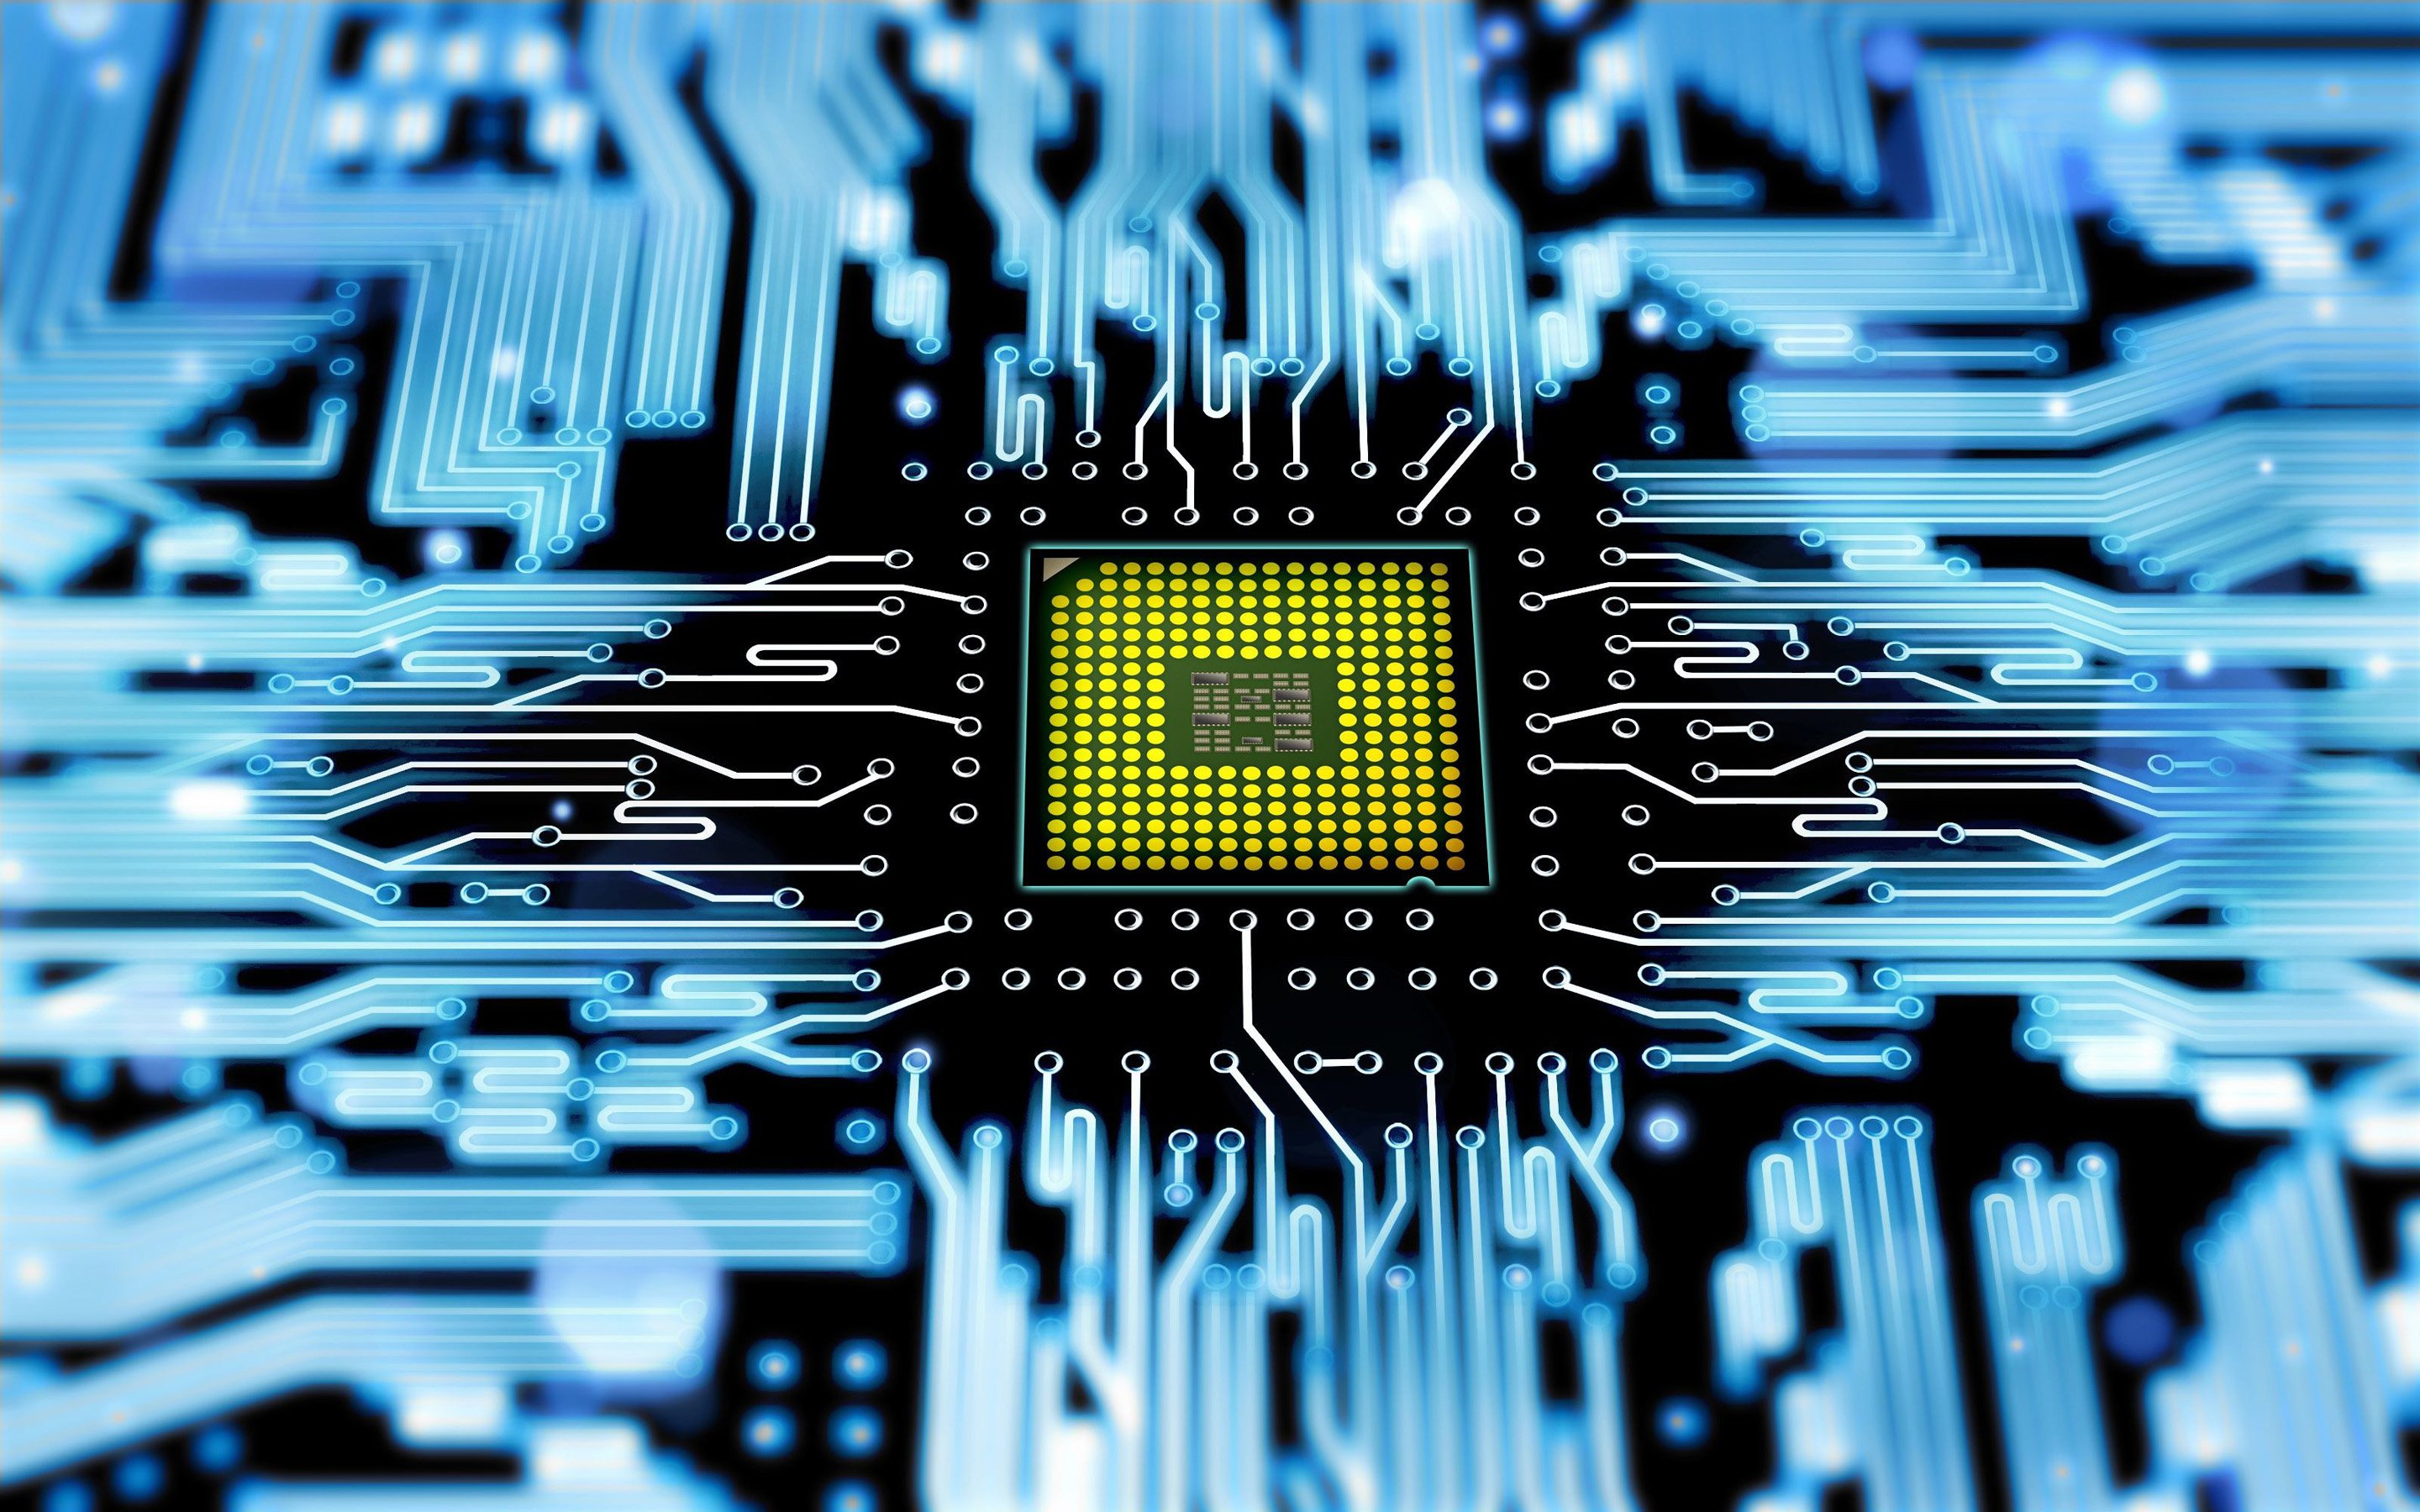 Download Wallpaper Computer Chip, 4k, Macro, PCB, Microcircuit, Microchip, Green Chip, Close Up, Chip, Motherboard For Desktop With Resolution 2880x1800. High Quality HD Picture Wallpaper